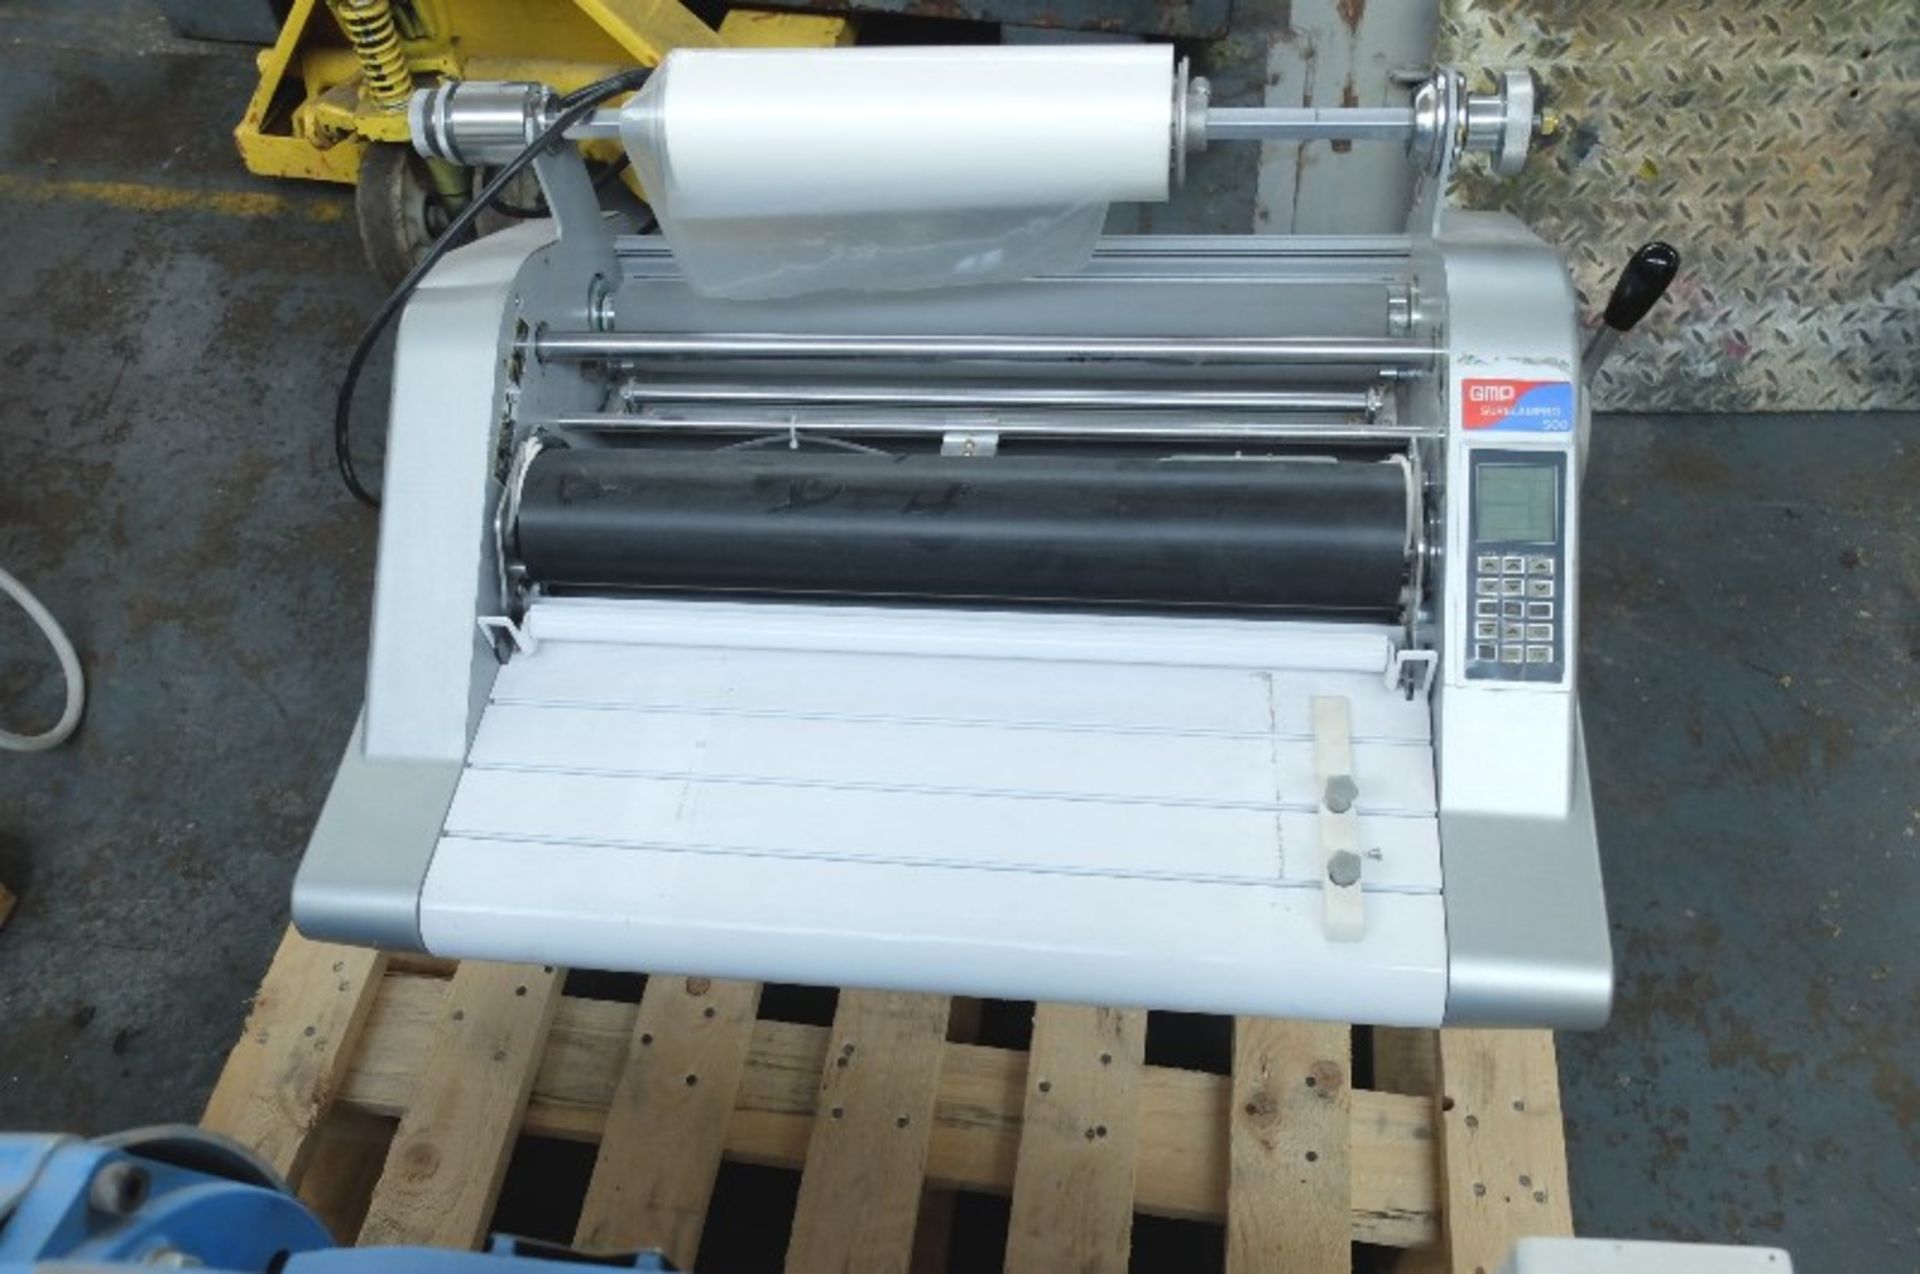 GMP SUPERJAM 500 LAMINATOR AGE: 2010 Touch button controls with programmable memory Speed 7meters pe - Image 3 of 3